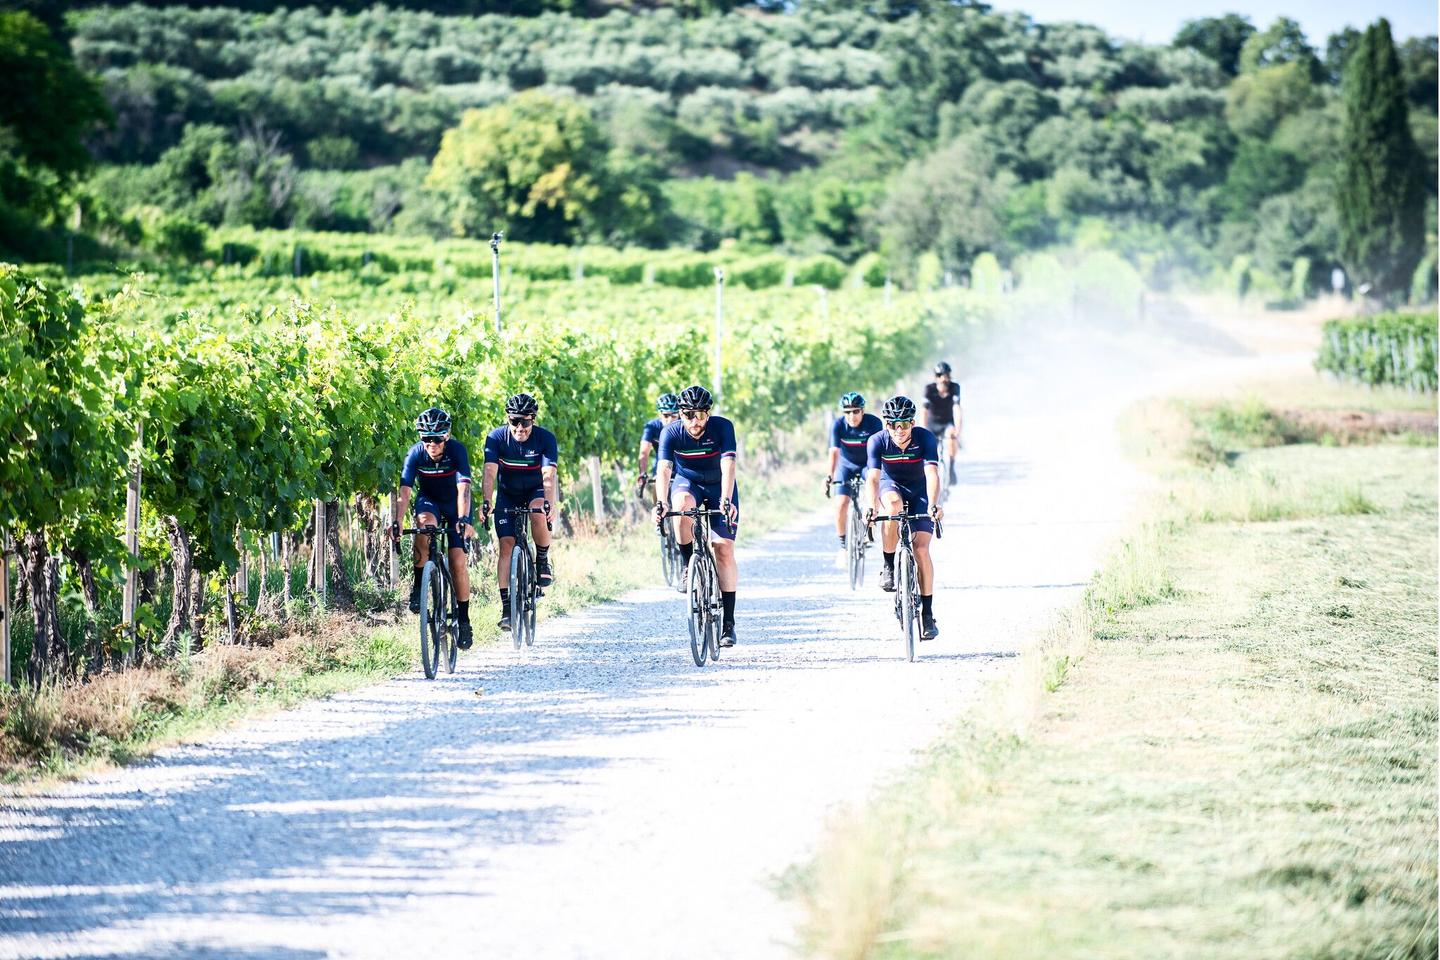 6 cyclists riding through the Tuscan countryside